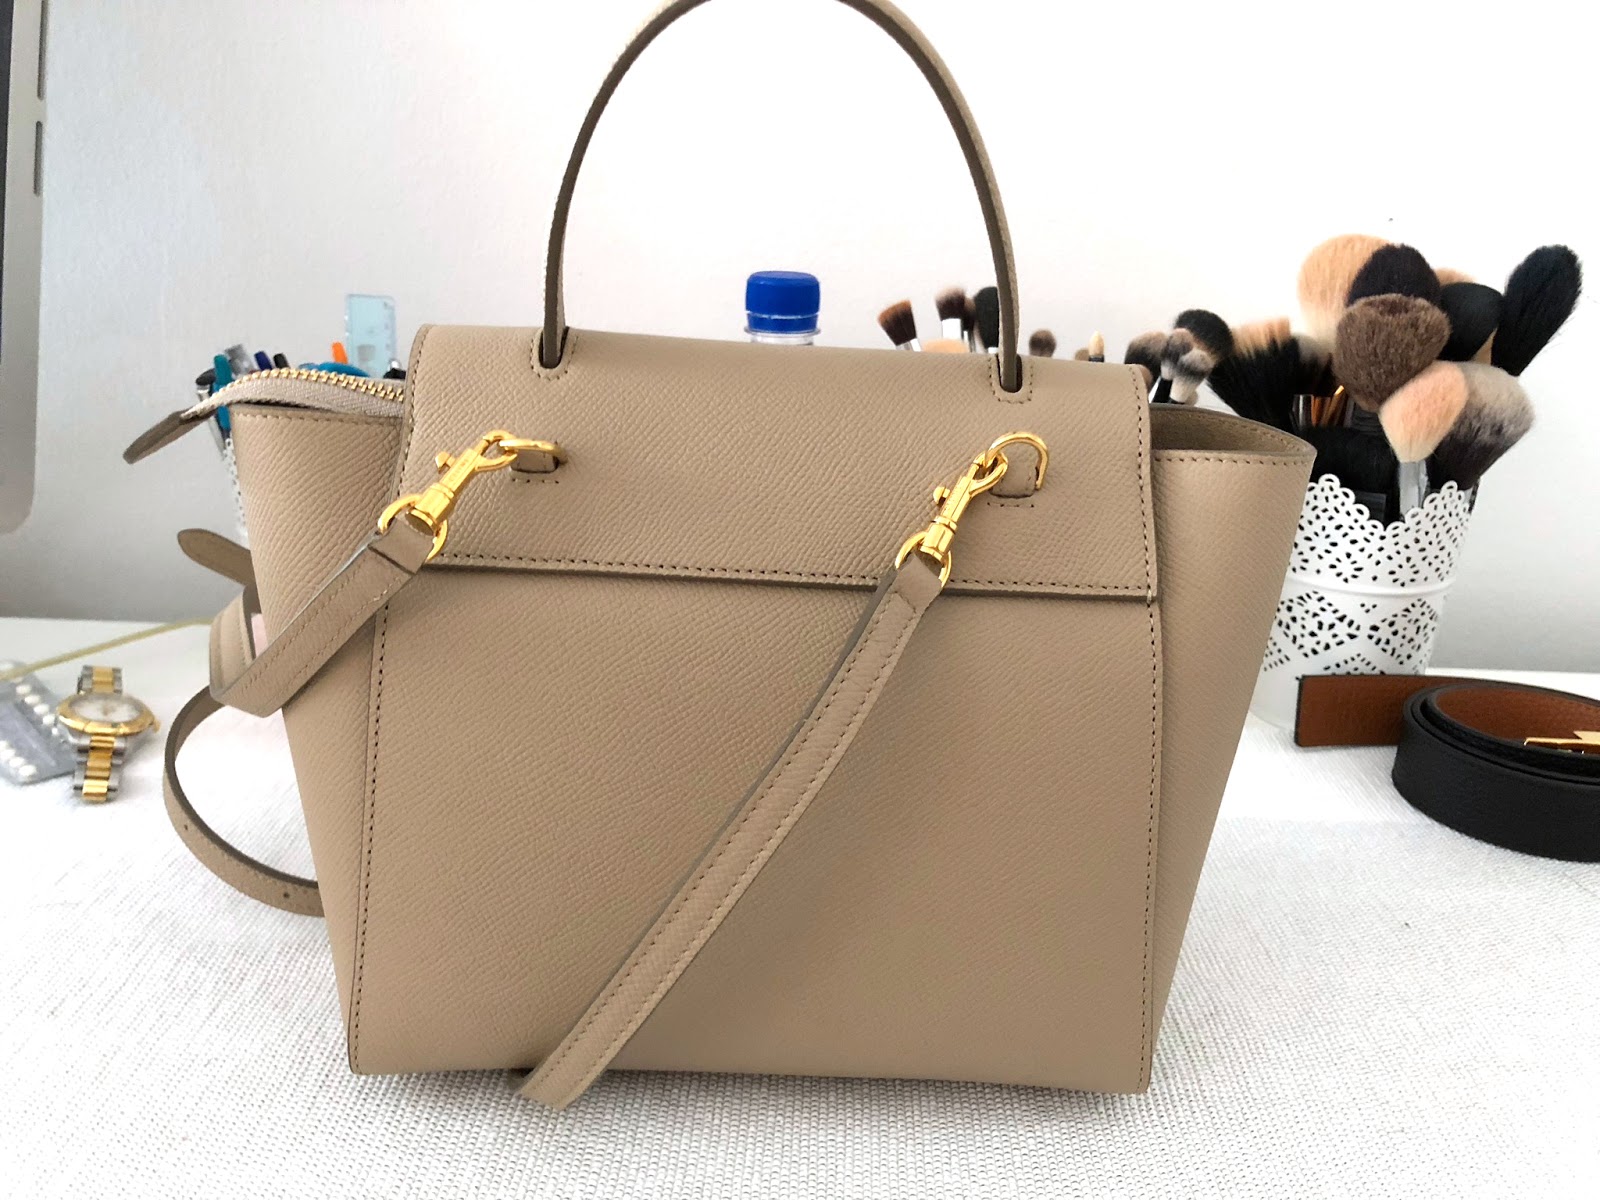 CELINE NANO BELT BAG REVIEW, What fits, pros and cons